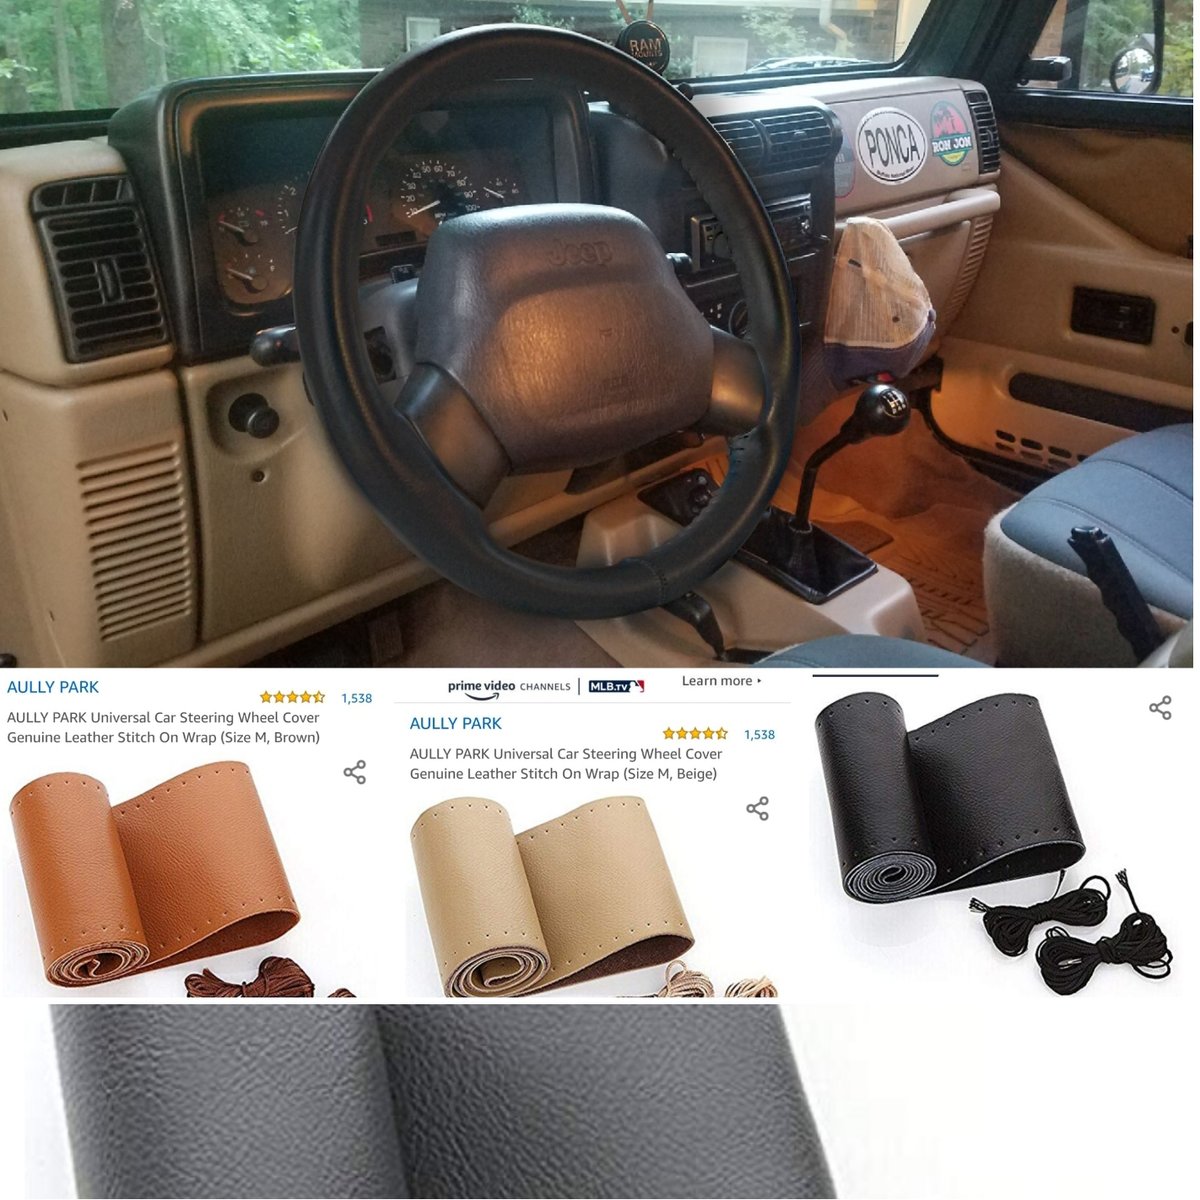 Size M, Black AULLY PARK Universal Car Steering Wheel Cover Genuine Leather Stitch On Wrap 